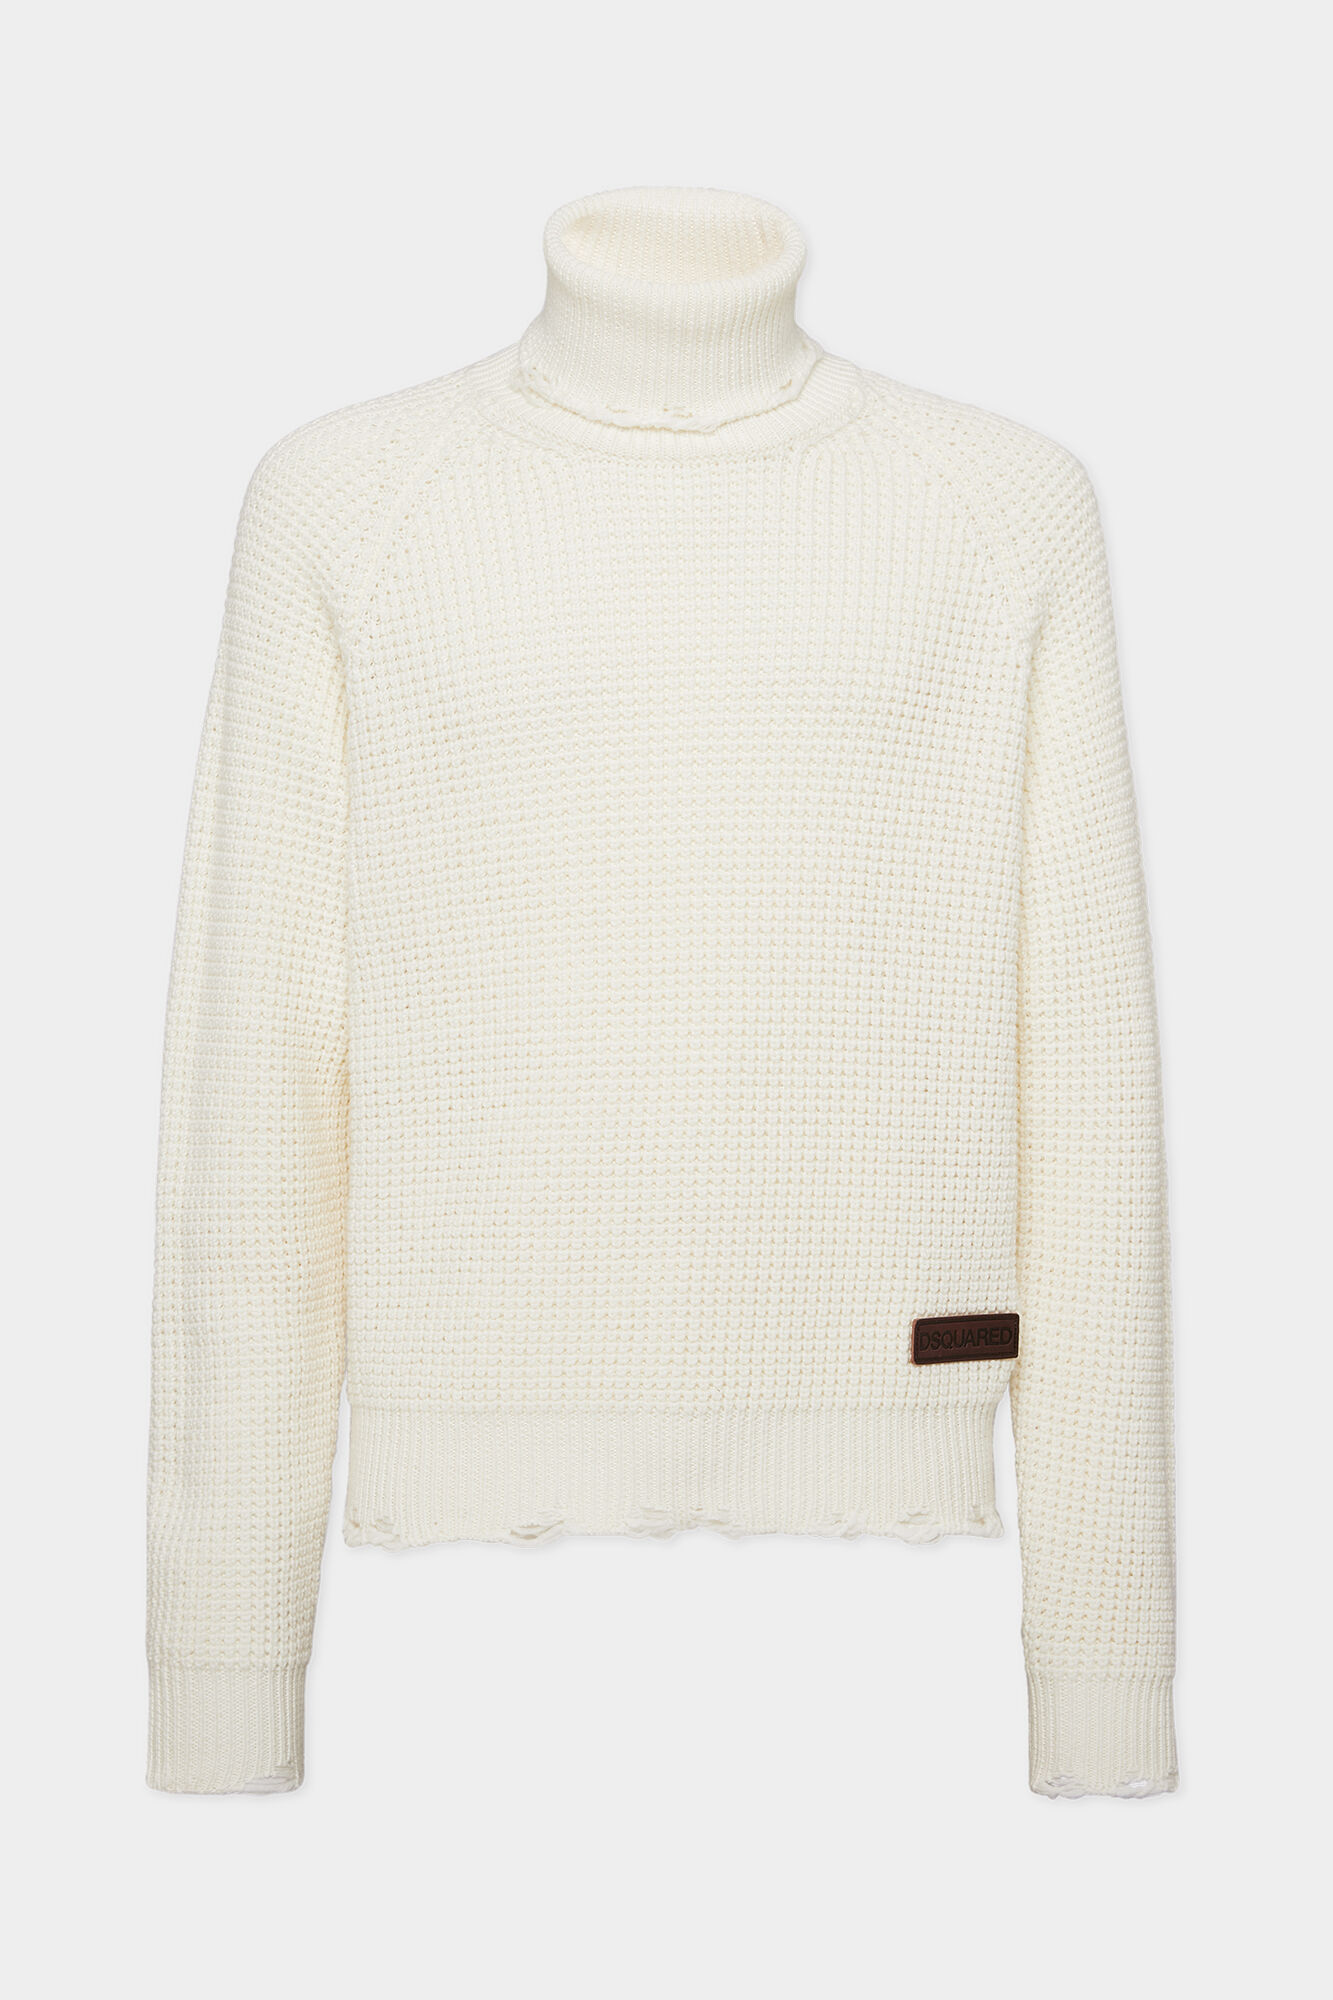 Men's Knitwear, Sweater, Turtleneck and Pullover | DSQUARED2